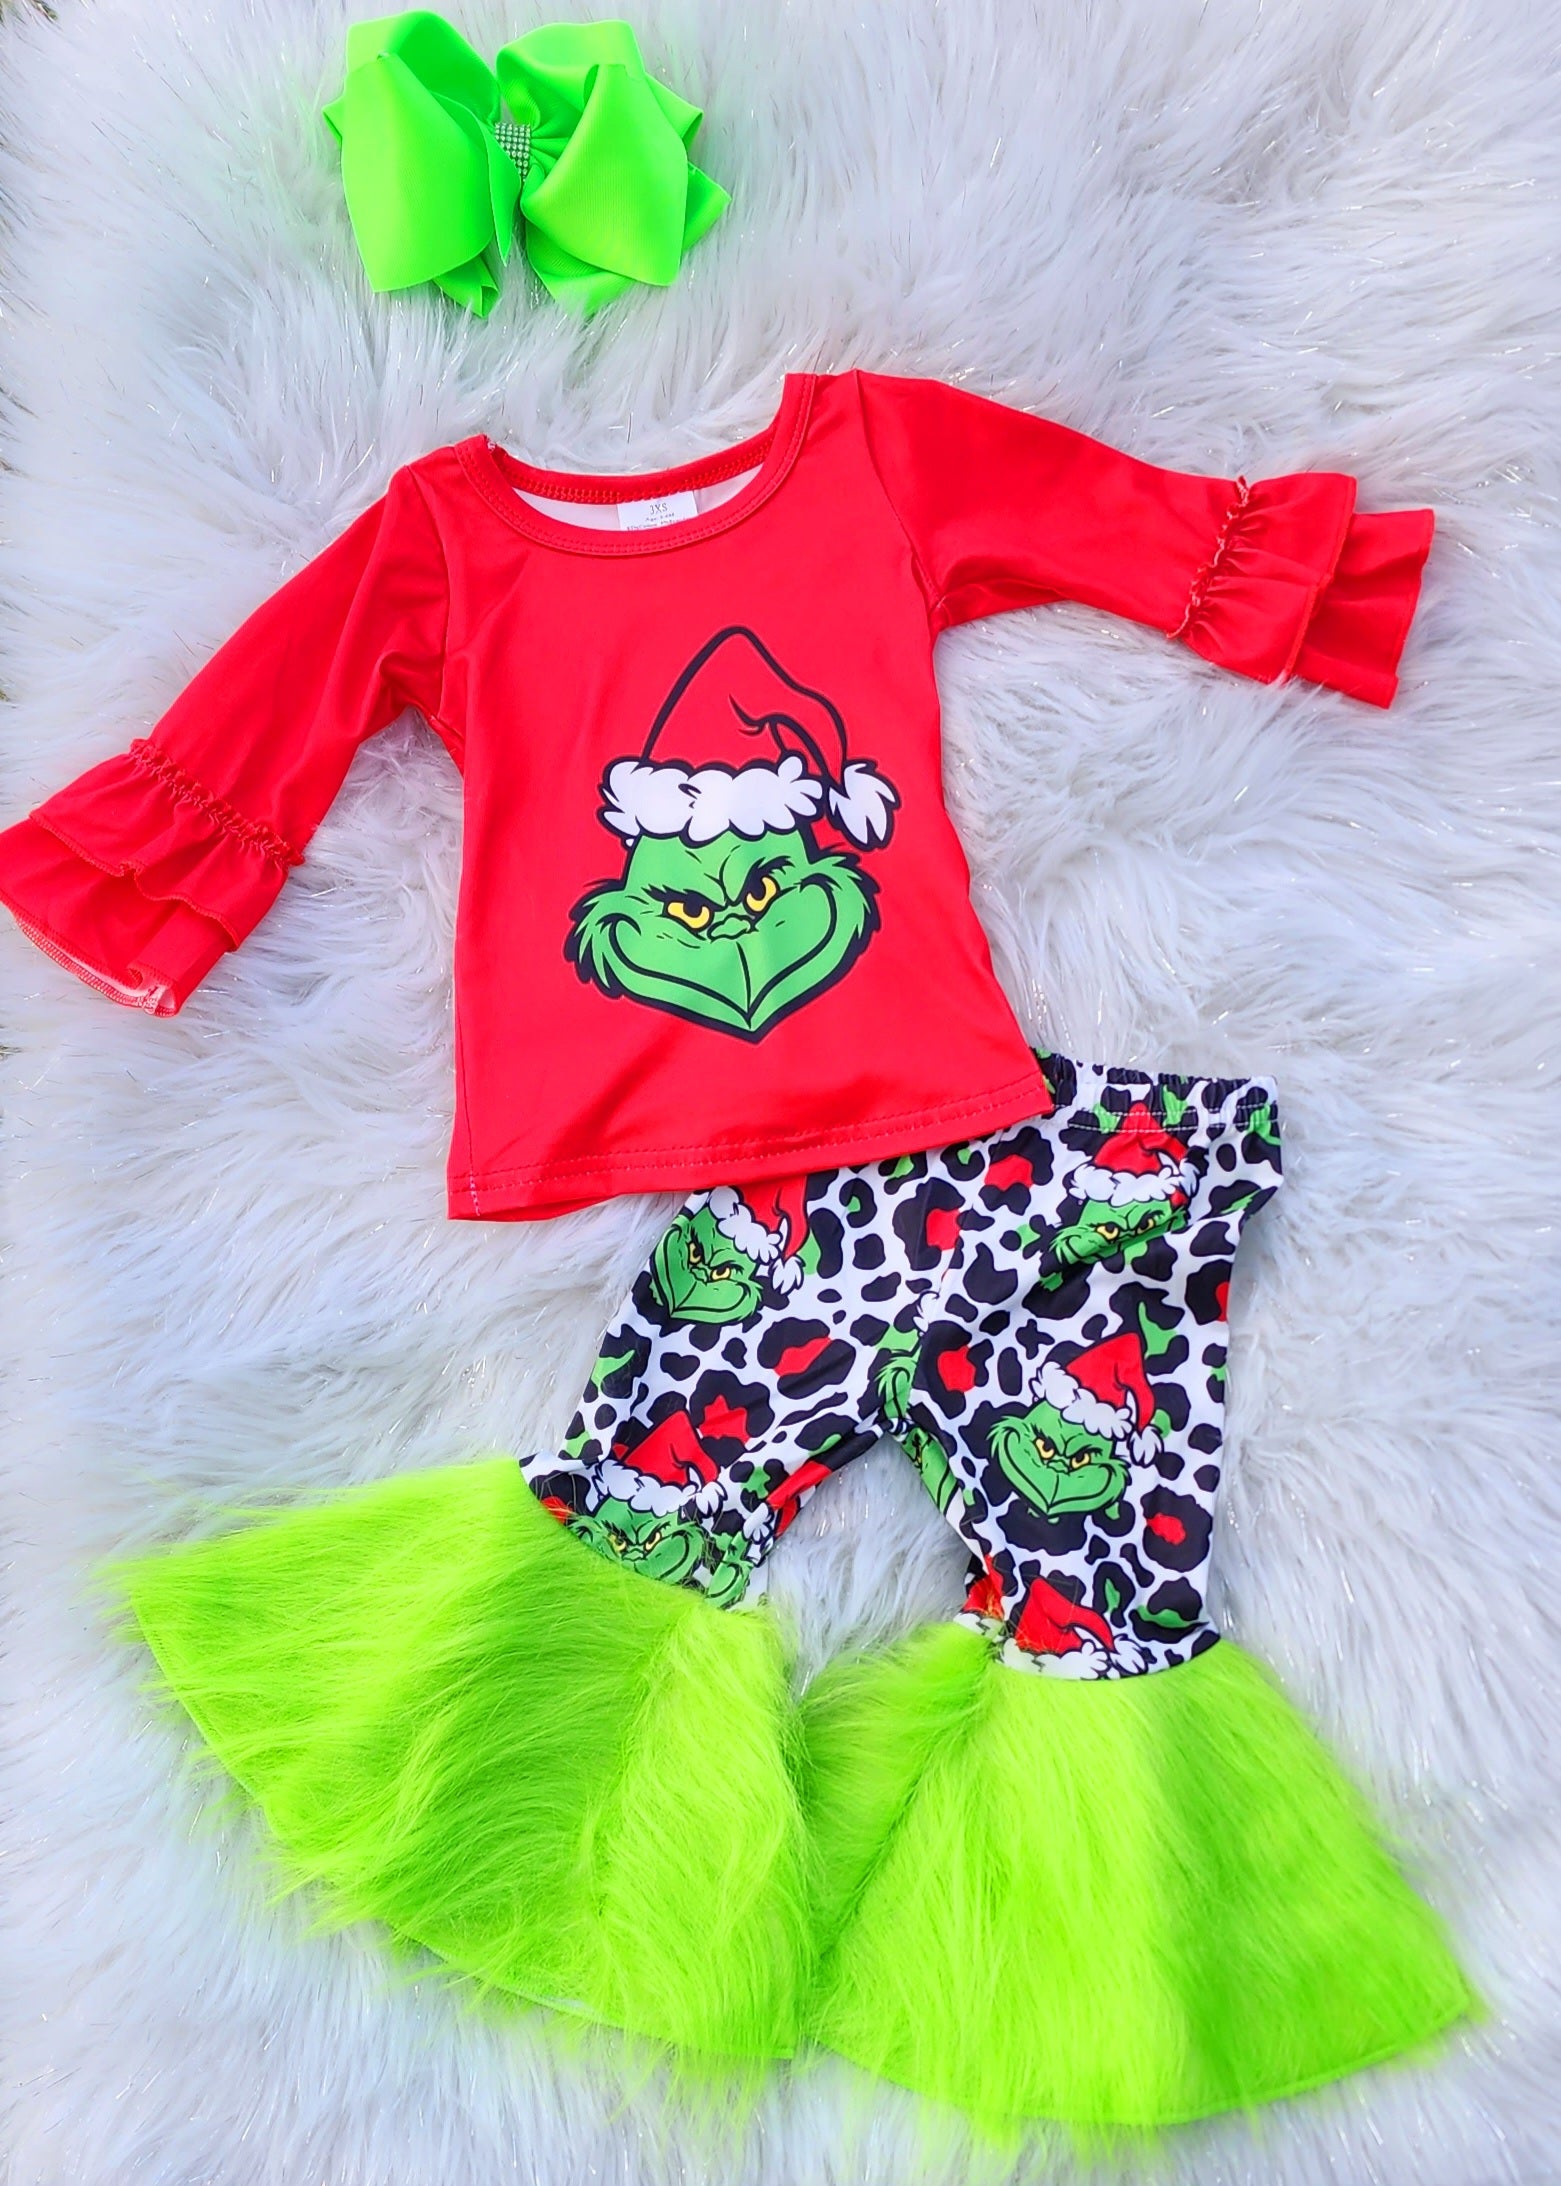 the grinch baby costume